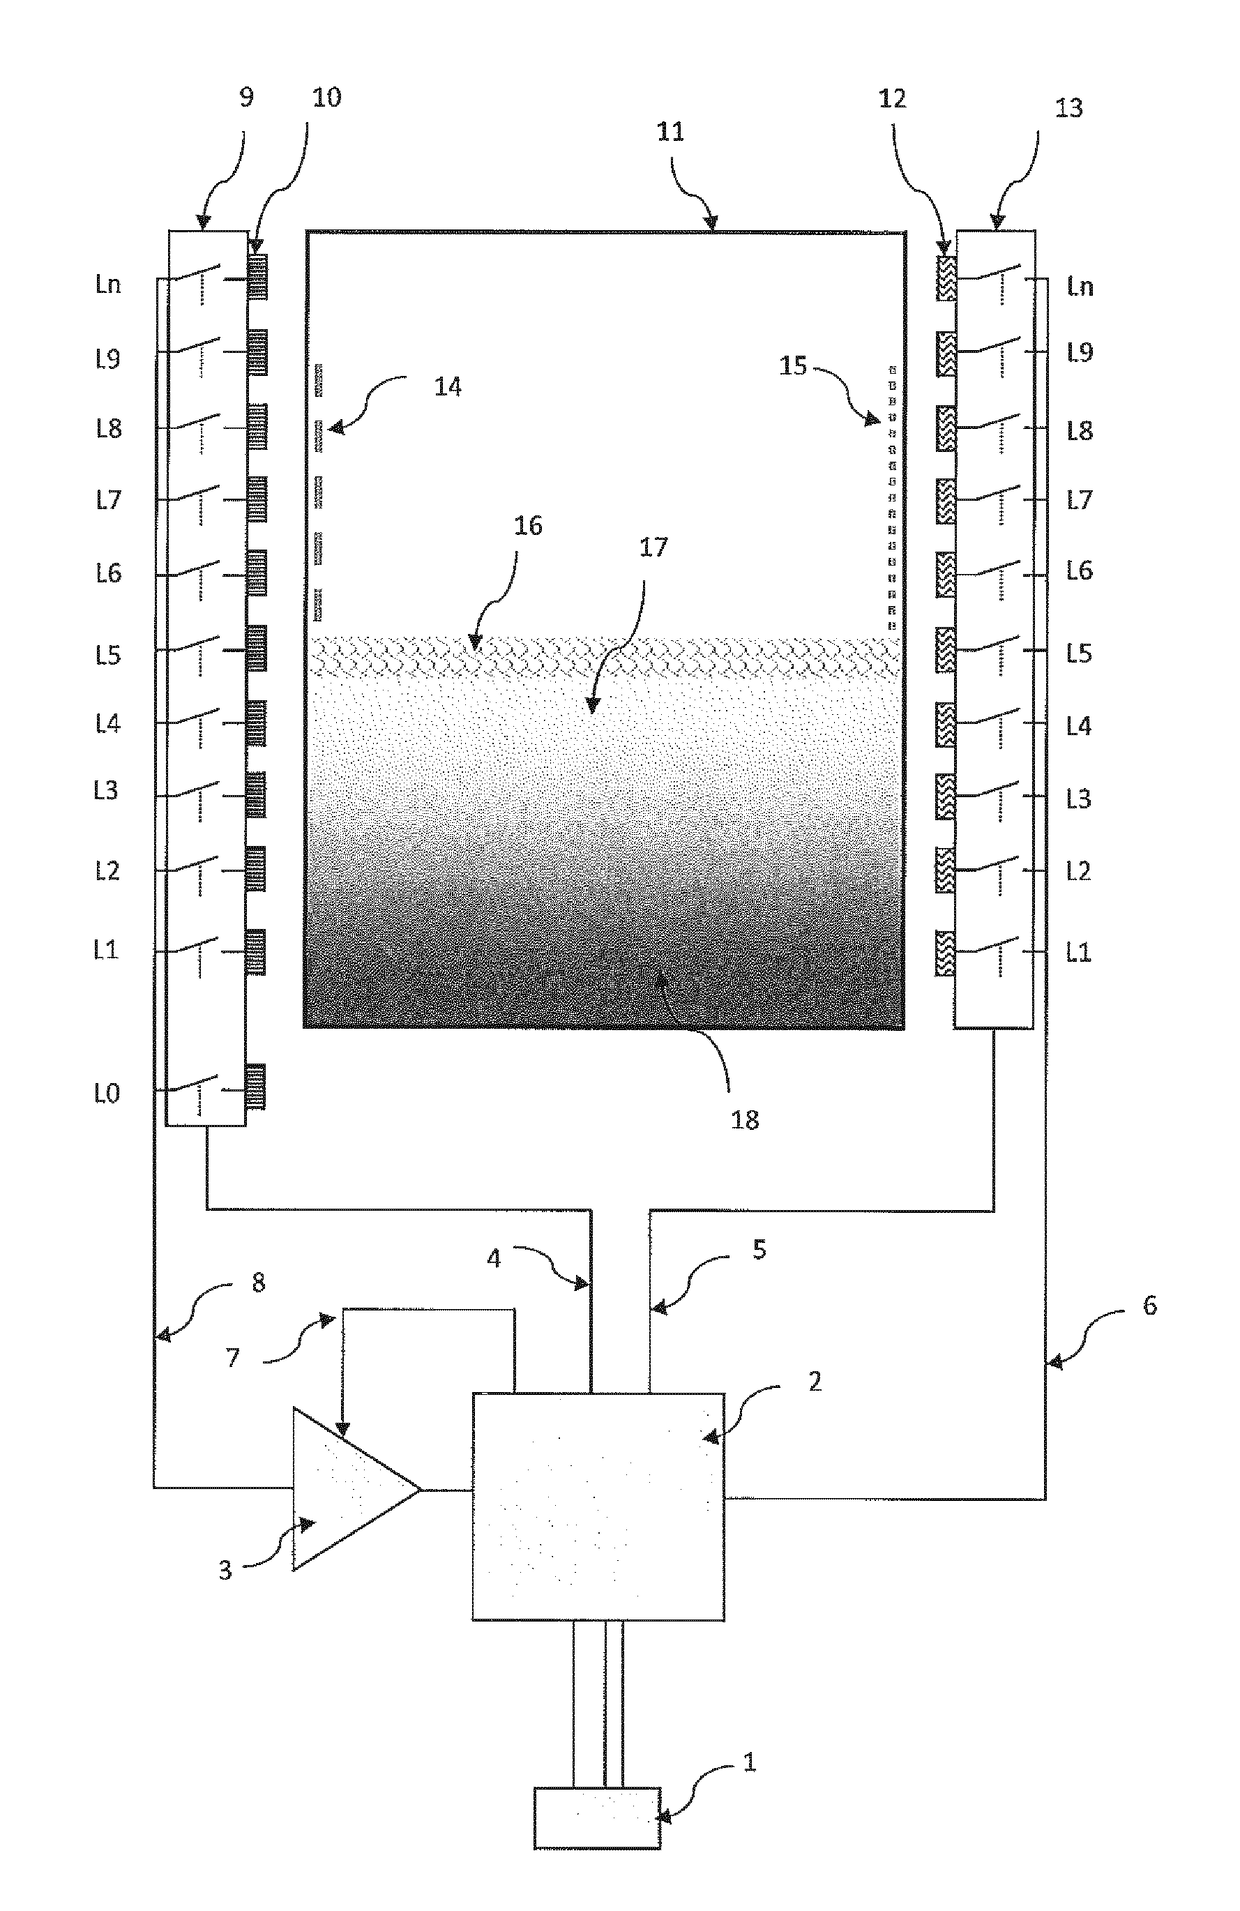 Apparatus and method for determining the liquid level of salvaged blood in a blood collection reservoir of an autologous blood transfusion system